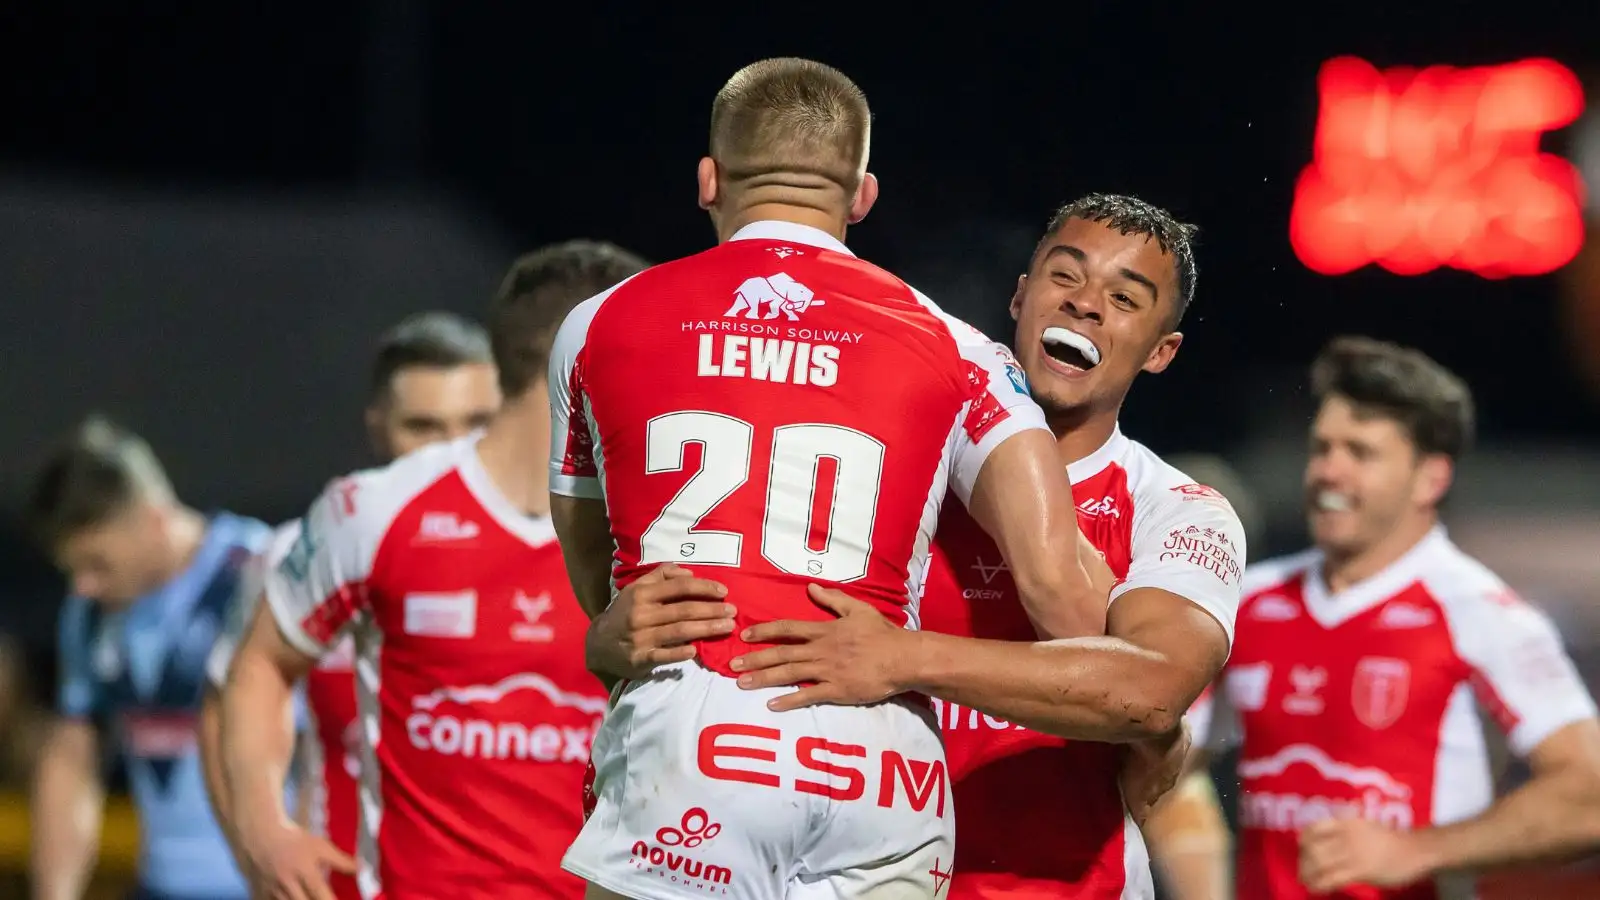 Hull KR boss tips bright future for new recruit following debut performance against St Helens